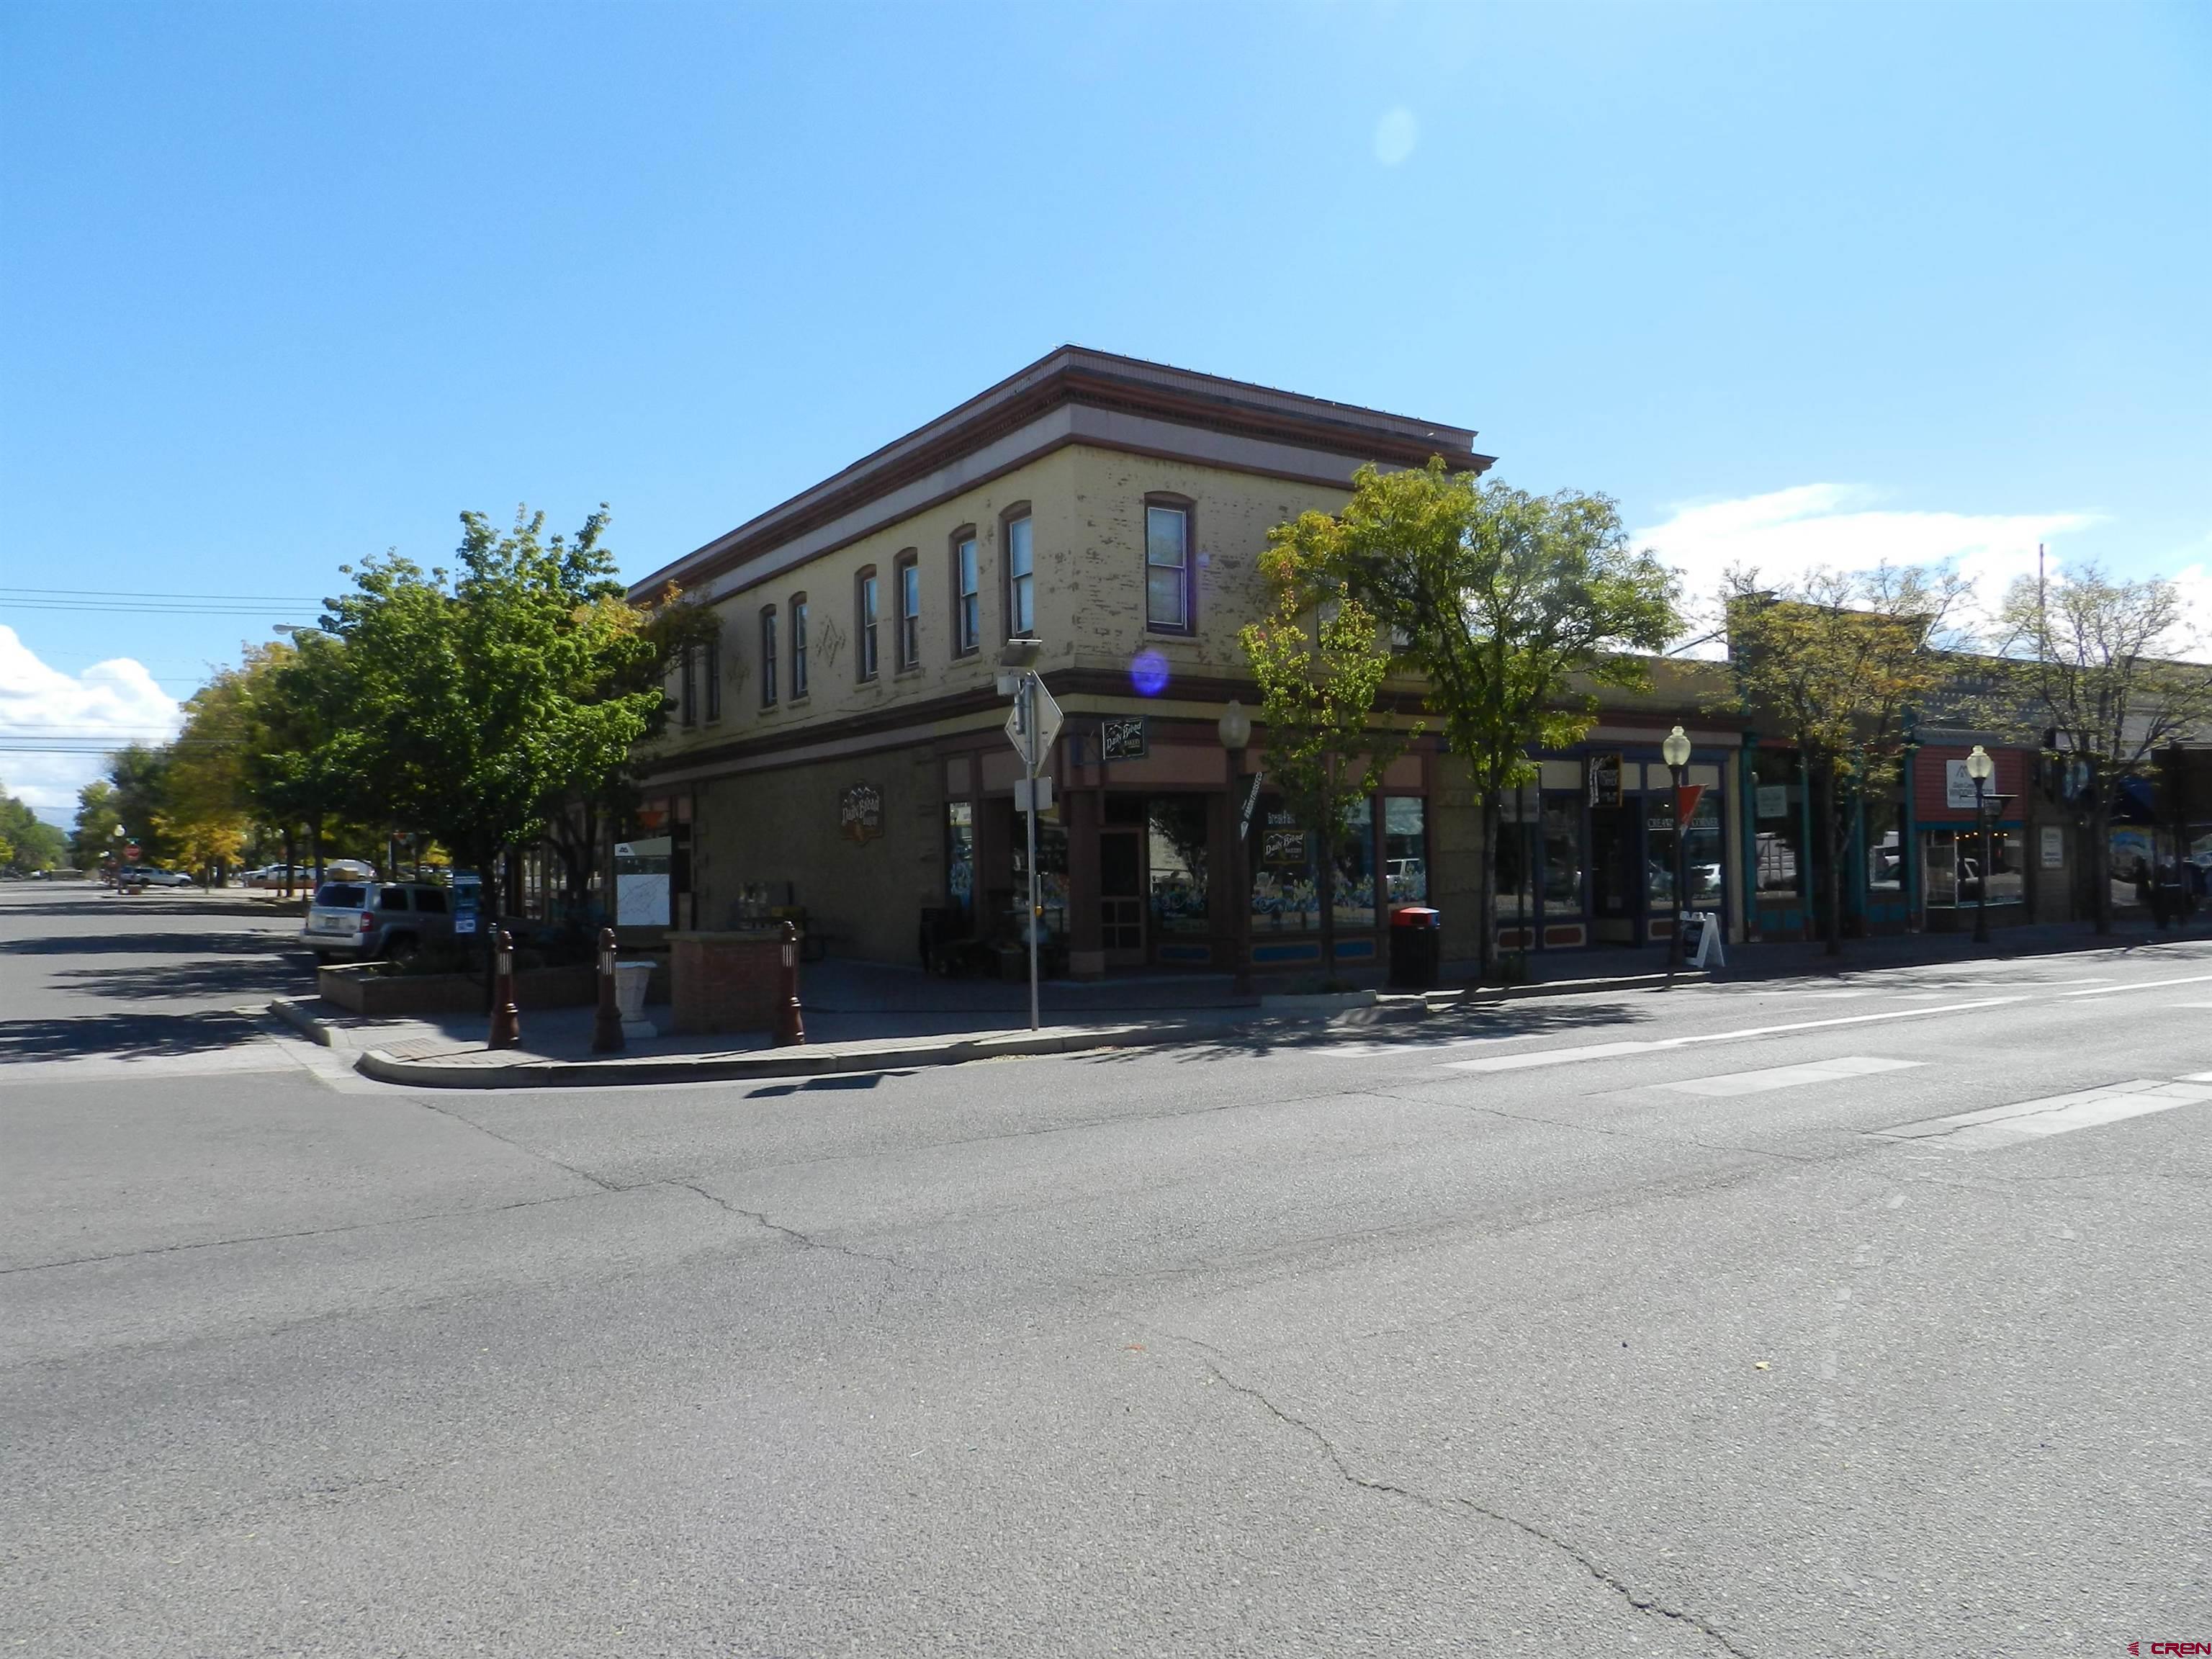 Amazing location, easy access off E Main and S Cascade in the heart of historic downtown Montrose. 6,888 sq. ft (MOL) building was built in 1896 and emphasizes lots of charm from that era. 16, 18 and 20 S Cascade, each have one bathroom per unit and separate entrances. 12 S Cascade is the upper unit and features 6 office spaces, 2 bathrooms, entire floor is vacant and ready to be leased. 344 & 346 E Main St have separate entrances, ample floor space and both units share 2 ADA bathrooms, plus full basements under each unit. 16 S Cascade has been fully renovated and is vacant. Zoned B-1 allows for many uses including retail, business or professional offices, restaurant, dance studio, art center or childcare facility. Great investment opportunity! Take advantage of this ideal location and space!  Additional 3,800 square feet of storage space in the basement